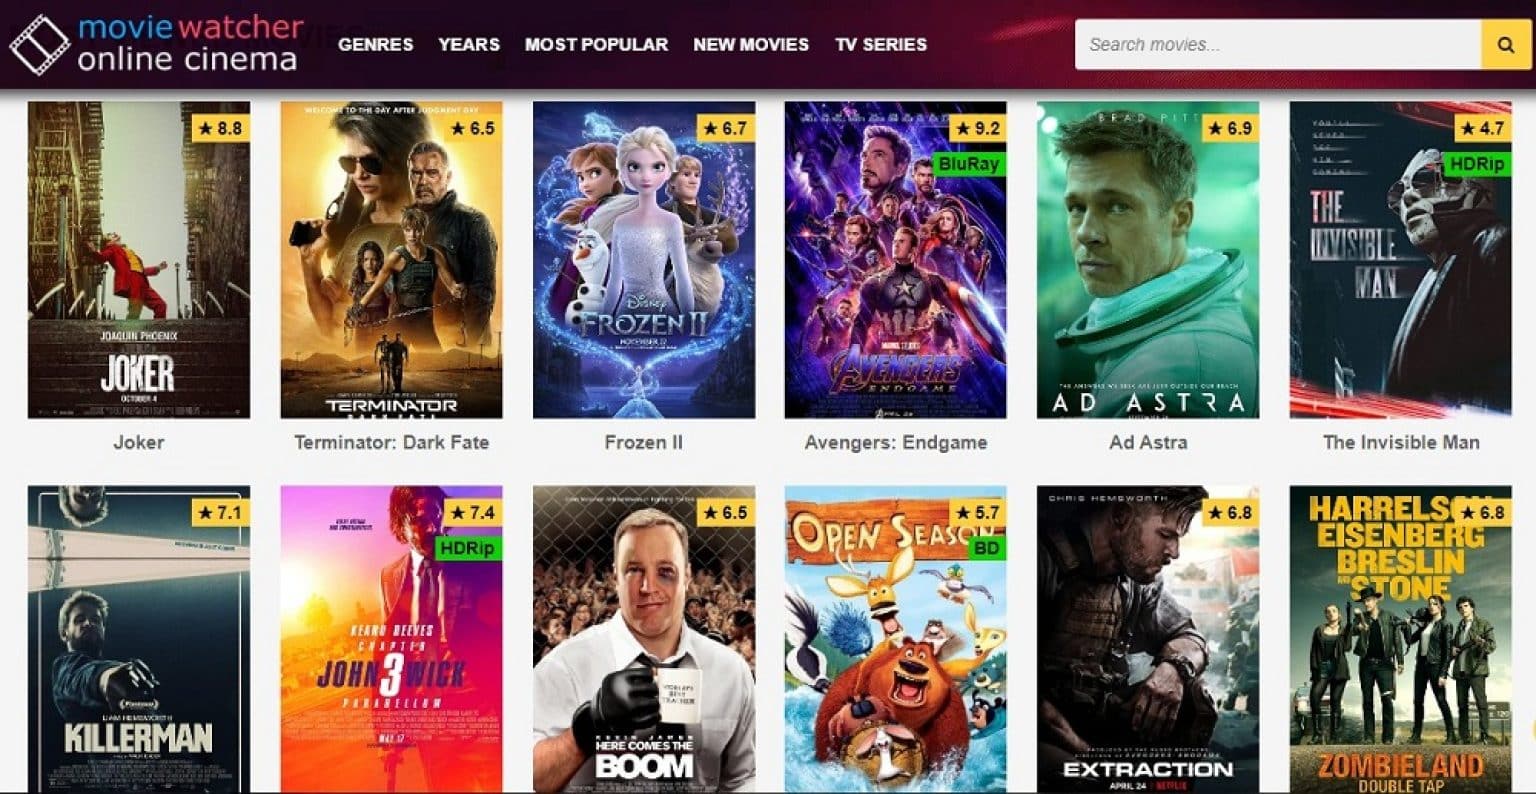 absolutely free download movies no registration